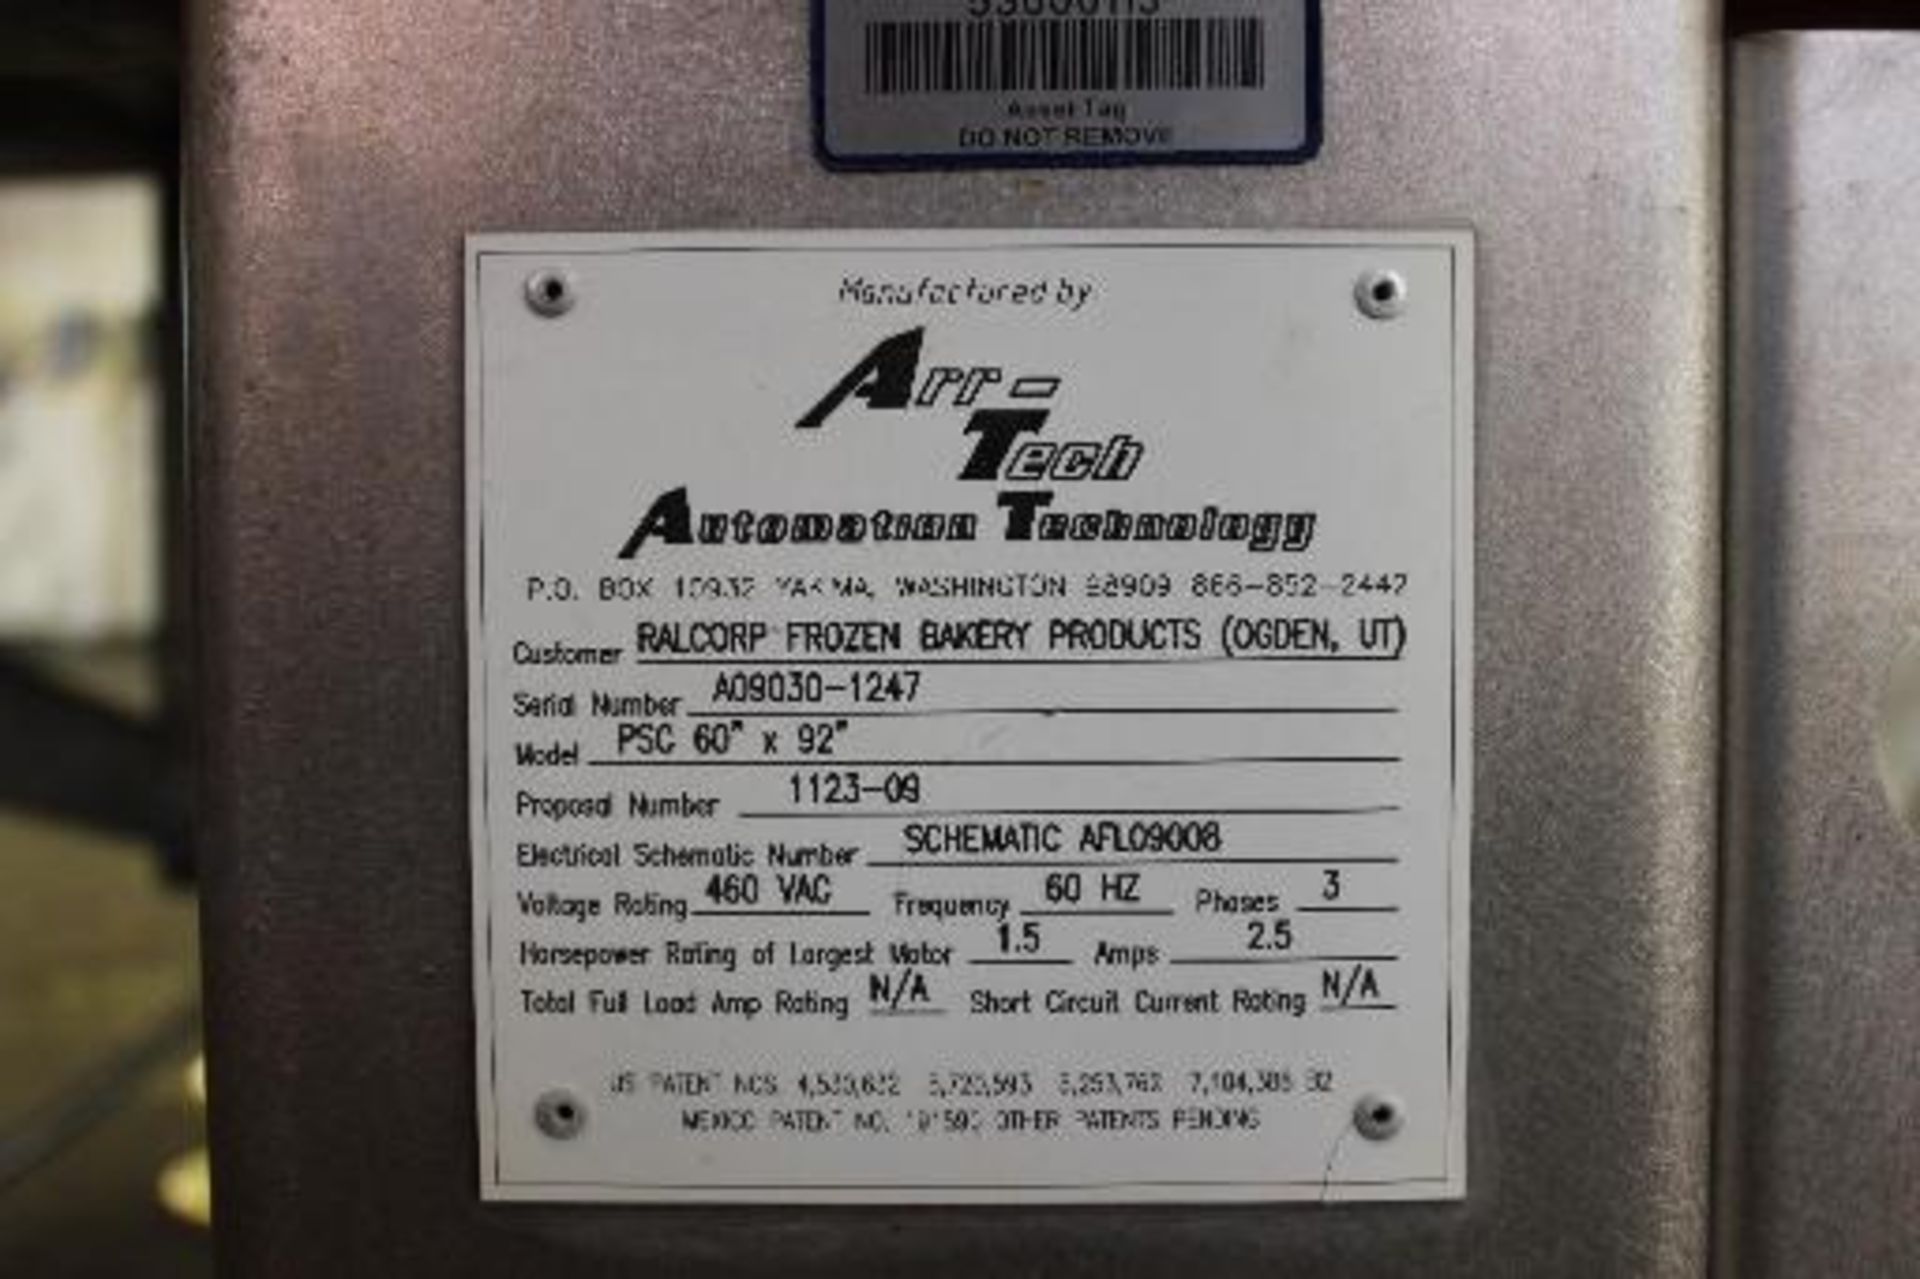 Arr-Tech Automation Technology Conveyor, model PSC 60 in. x 92 in.(ET-25814) Located in Ogden, - Image 2 of 3